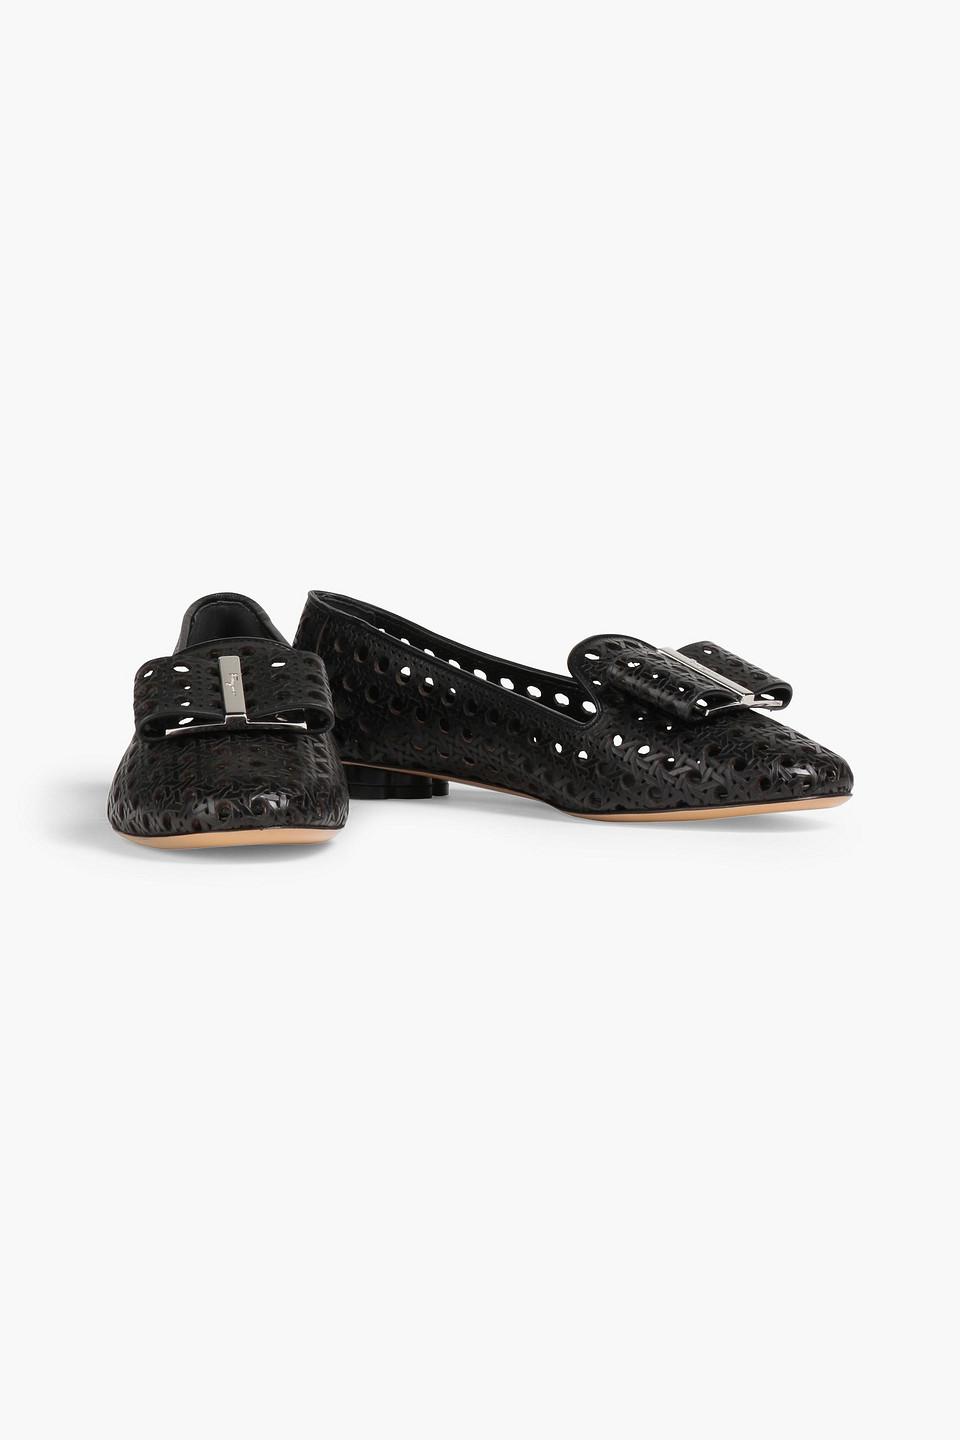 Ferragamo Bow-embellished Laser-cut Leather Loafers in Black Womens Shoes Flats and flat shoes Ballet flats and ballerina shoes 